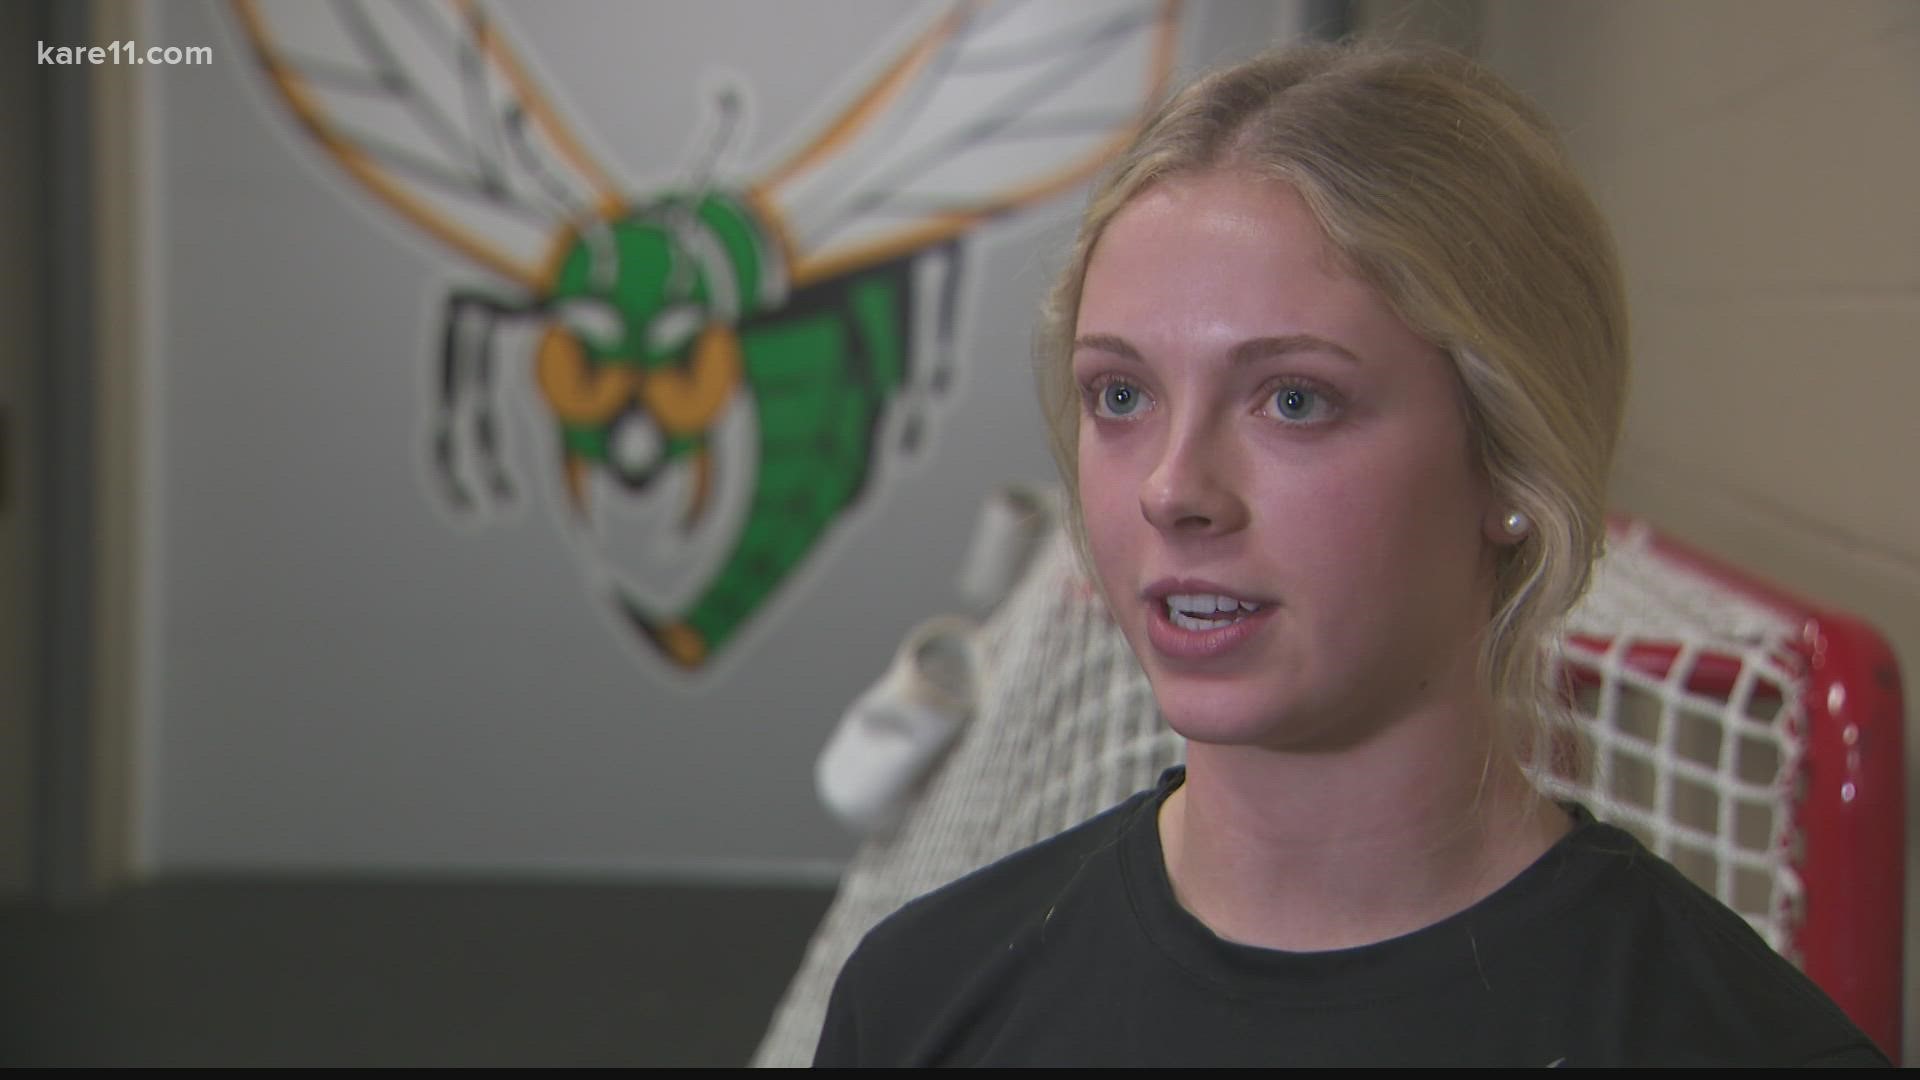 Jungels leads the undefeated Edina Hornets womens hockey team with 11 points and 9 assists through the first four games this season.